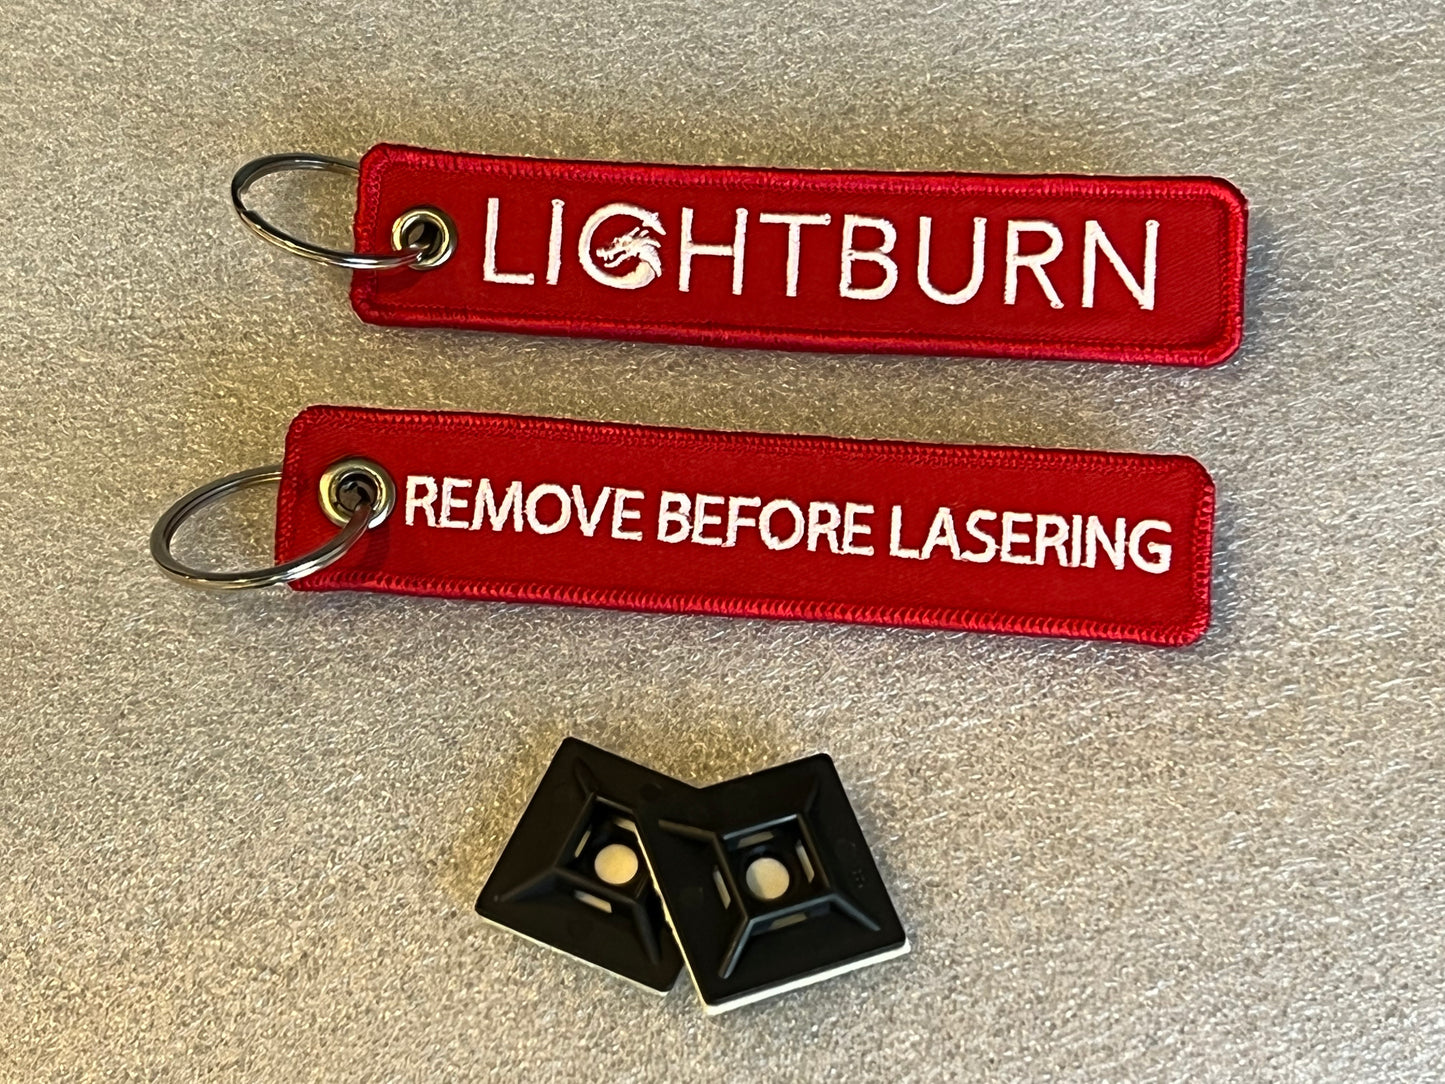 Remove Before Lasering tag